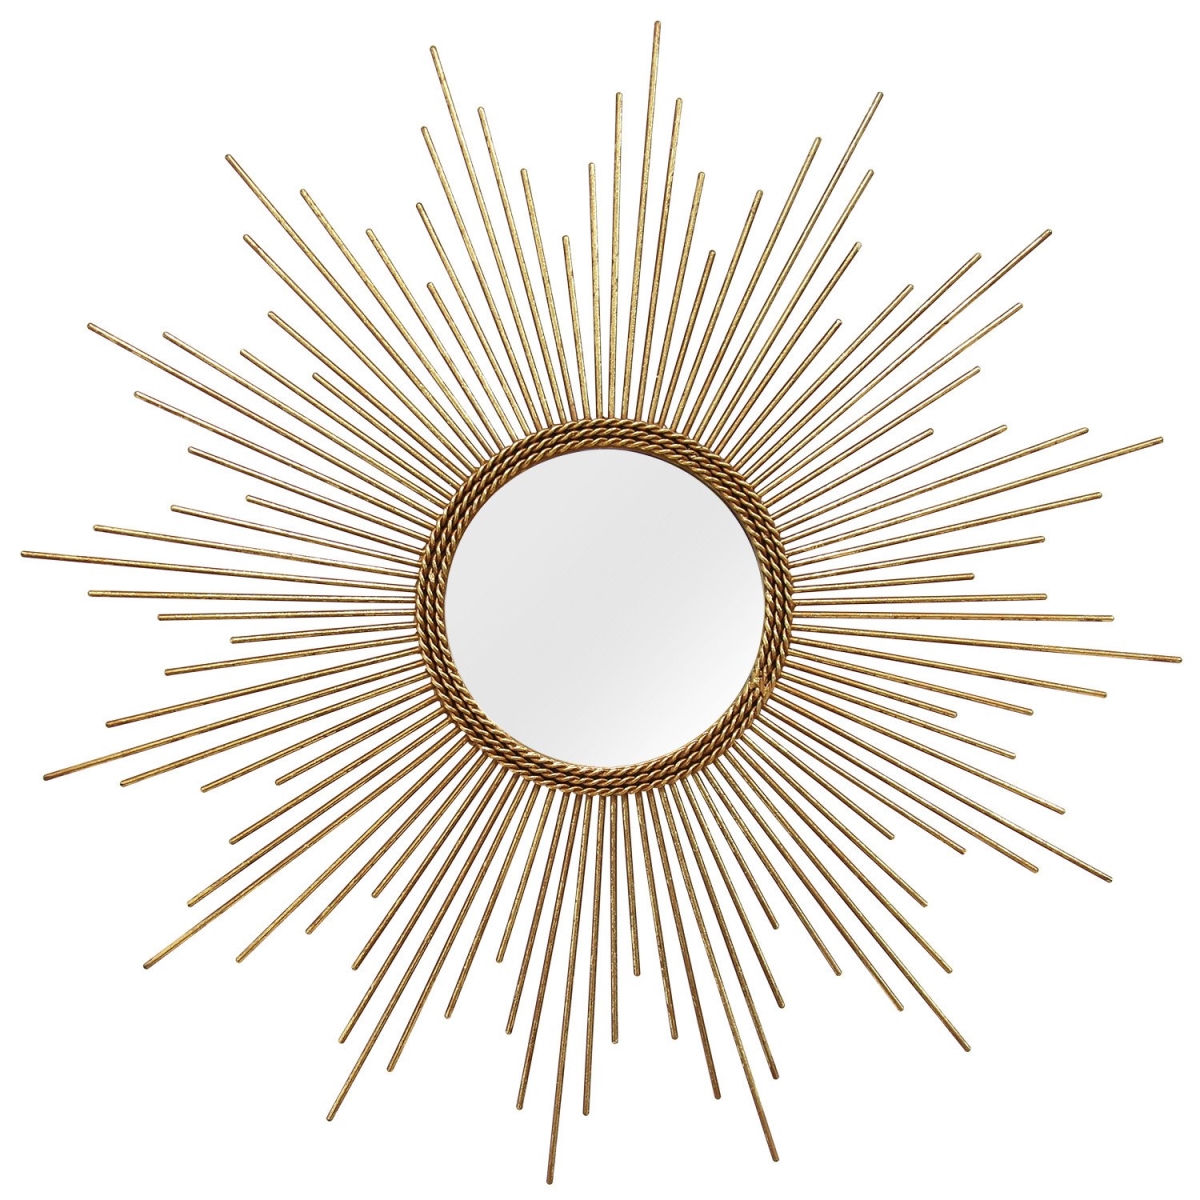 Home Roots 321059 Simple Yet Striking Wall Mirror, Gold